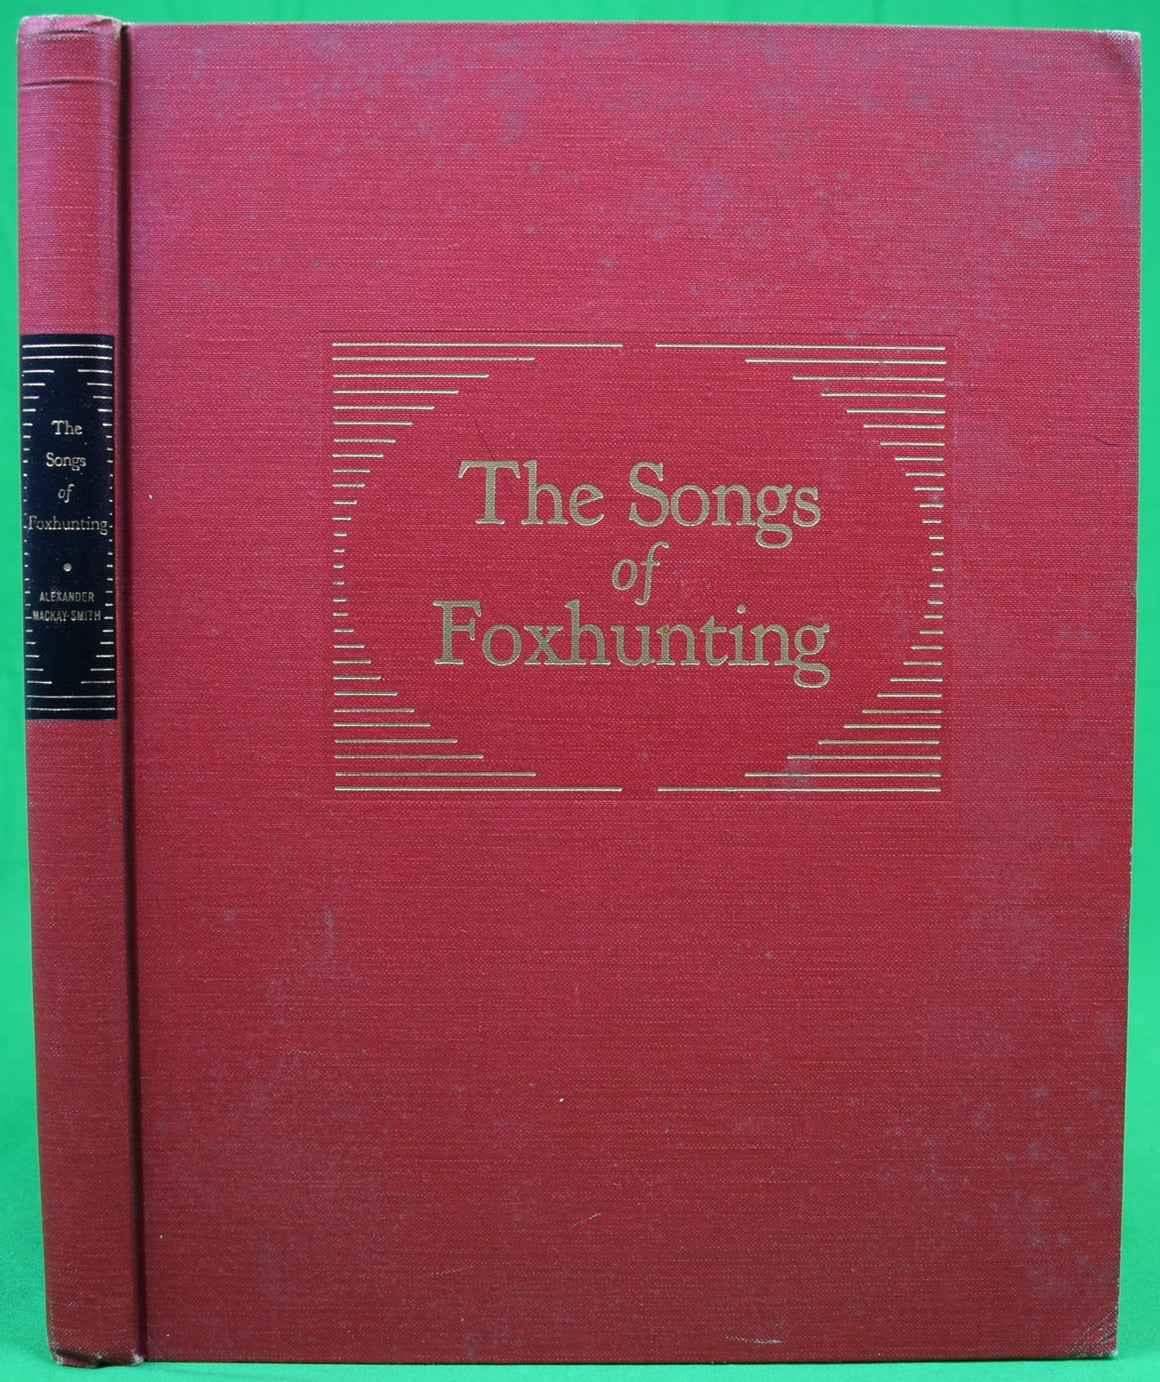 "The Songs Of Foxhunting" 1974 MACKAY-SMITH, Alexander